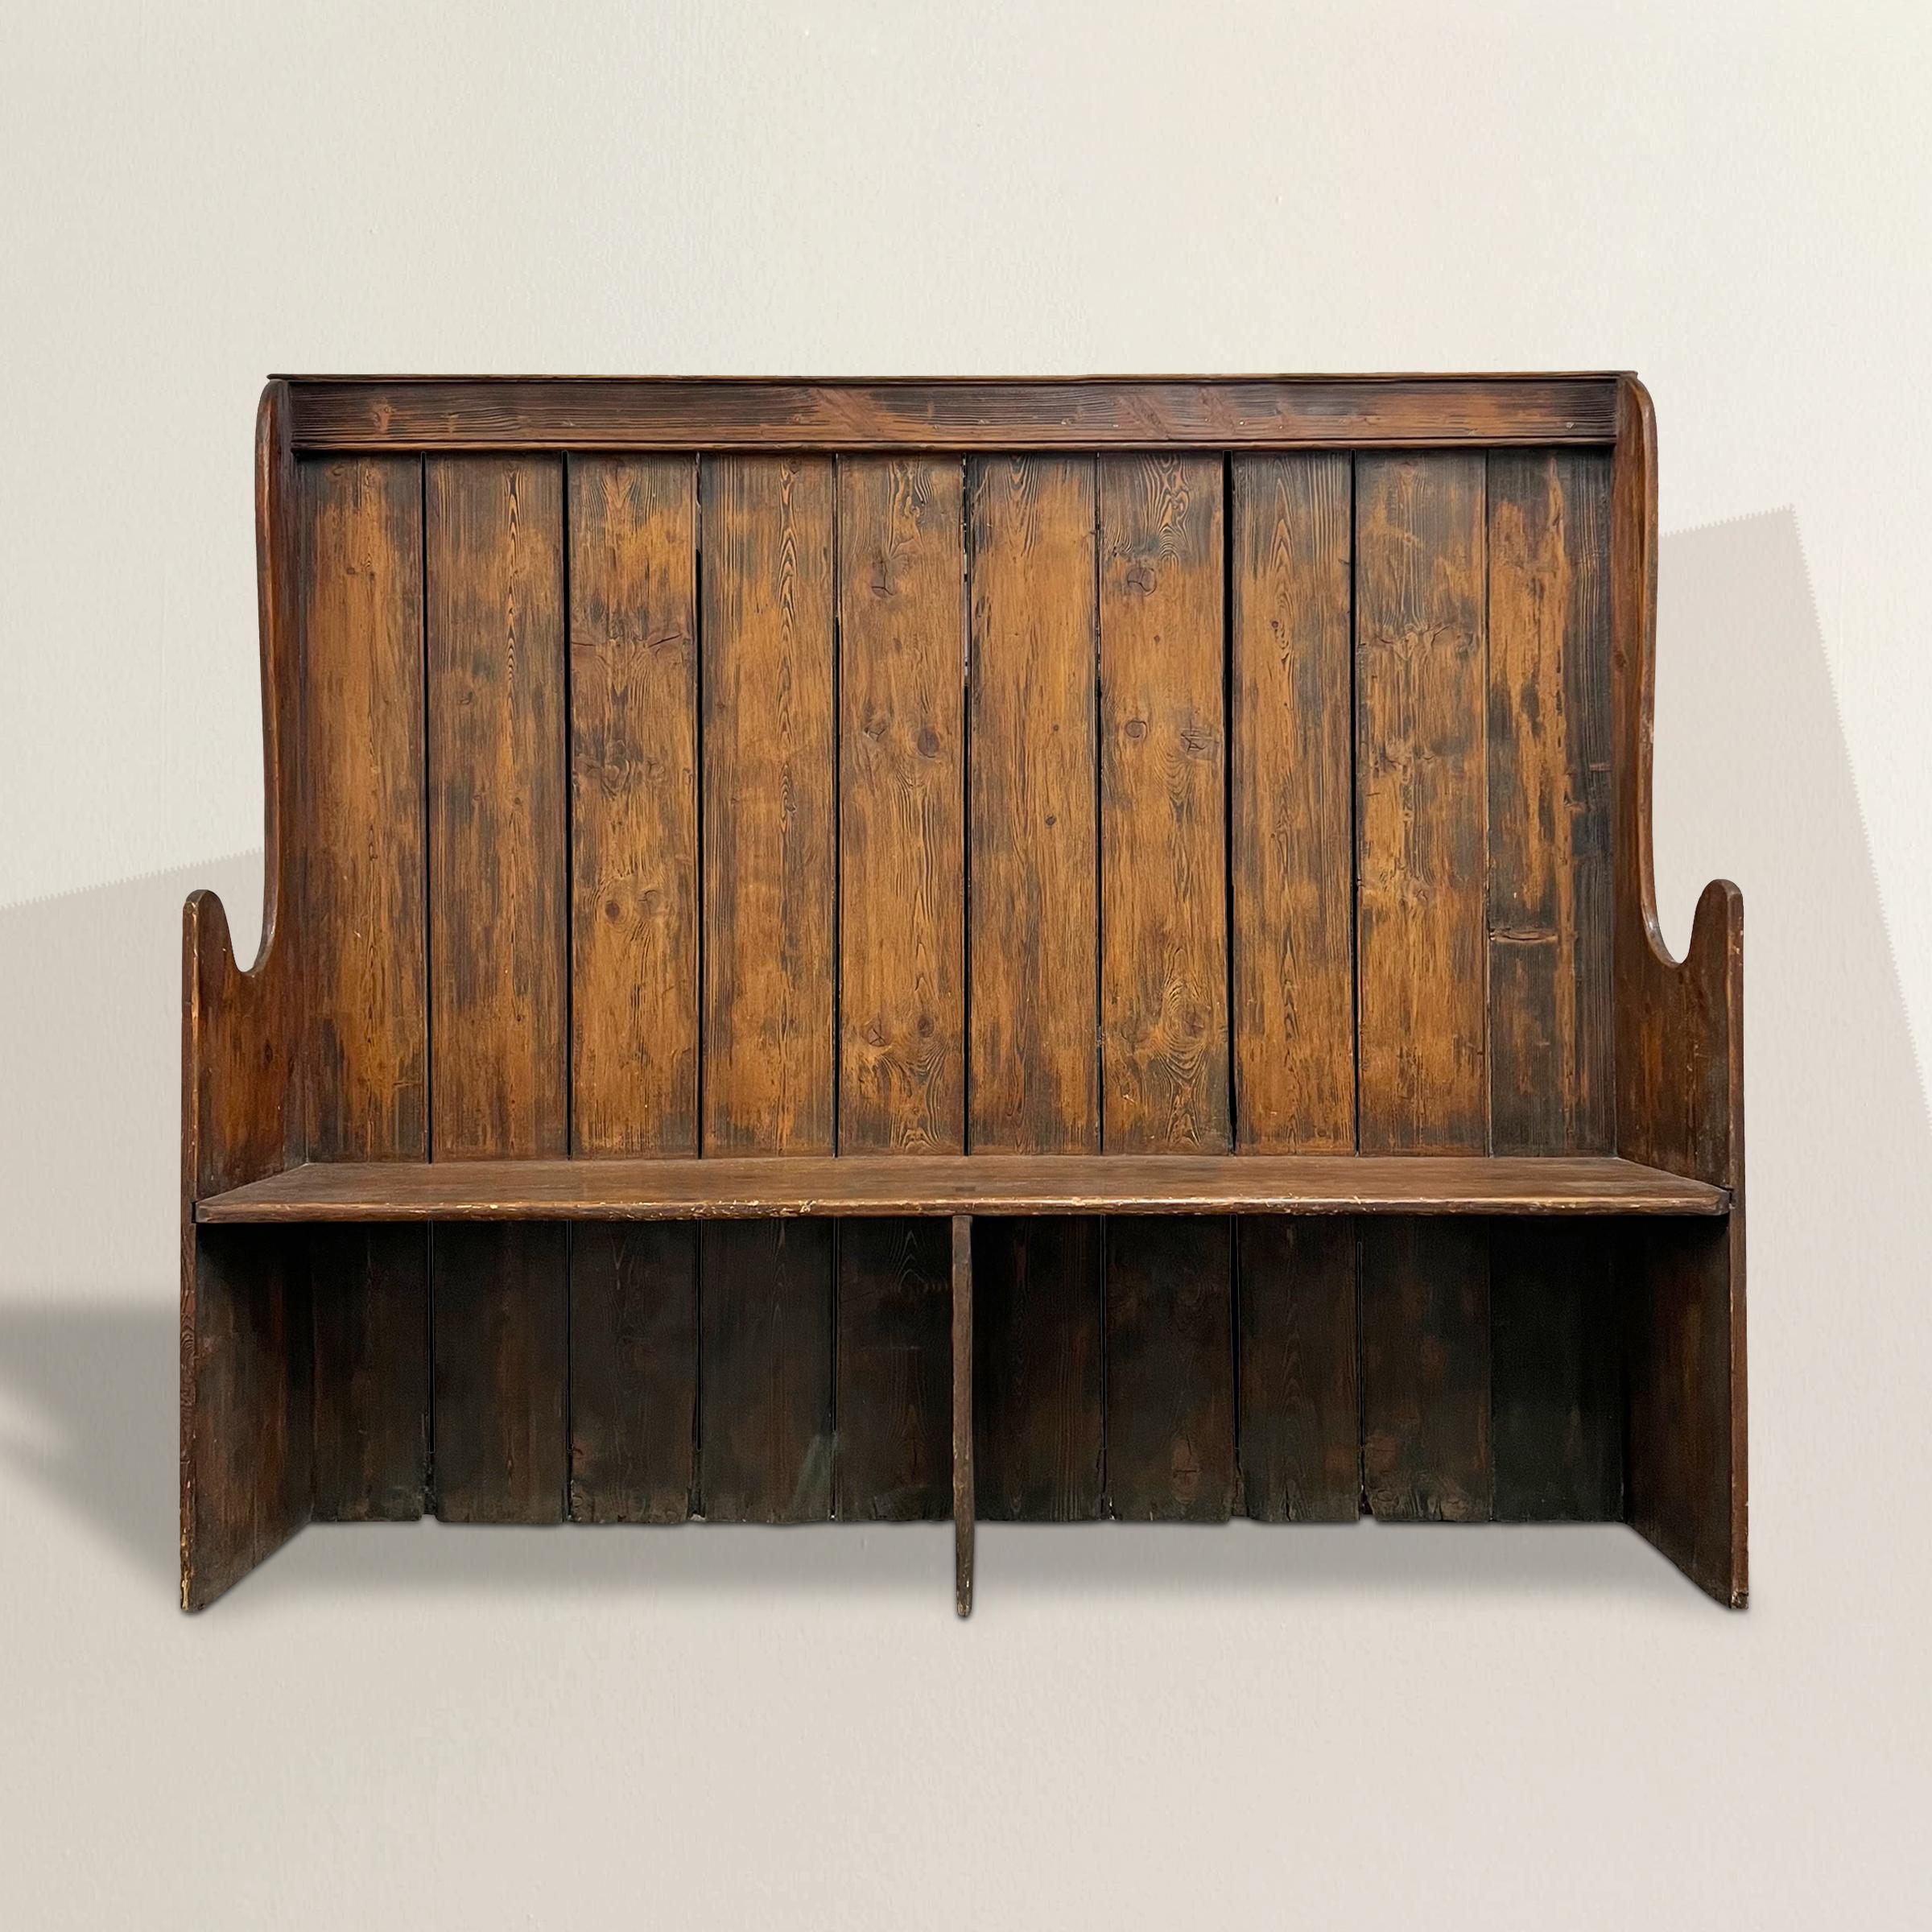 This exquisite 19th-century English Settle, handcrafted from the warm, honey-hued embrace of pine, carries the marks of time, showcasing glimpses of its original, weathered blue paint. Its charm knows no bounds, making it an ideal and versatile